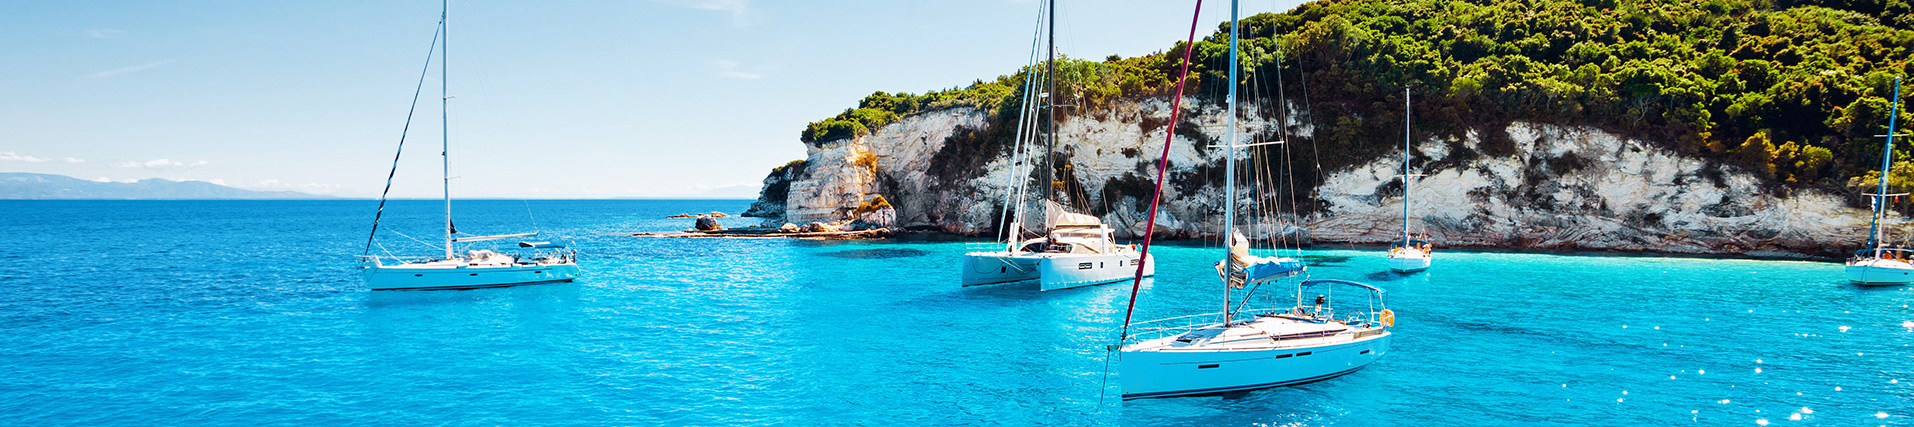 Sailboats charter in Italy